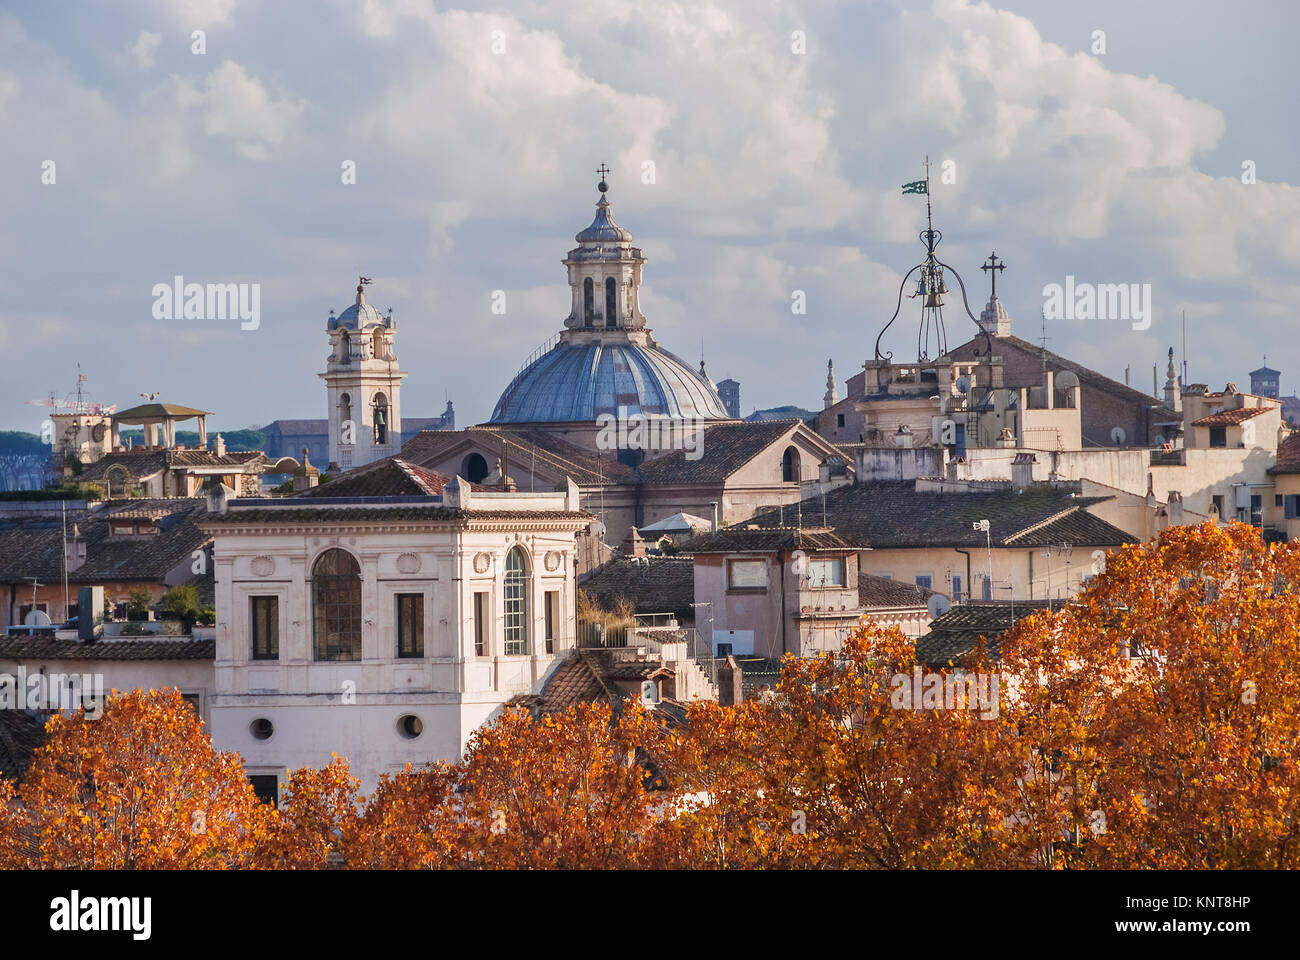 Samples of Rome historic center old architecture styles Stock Photo